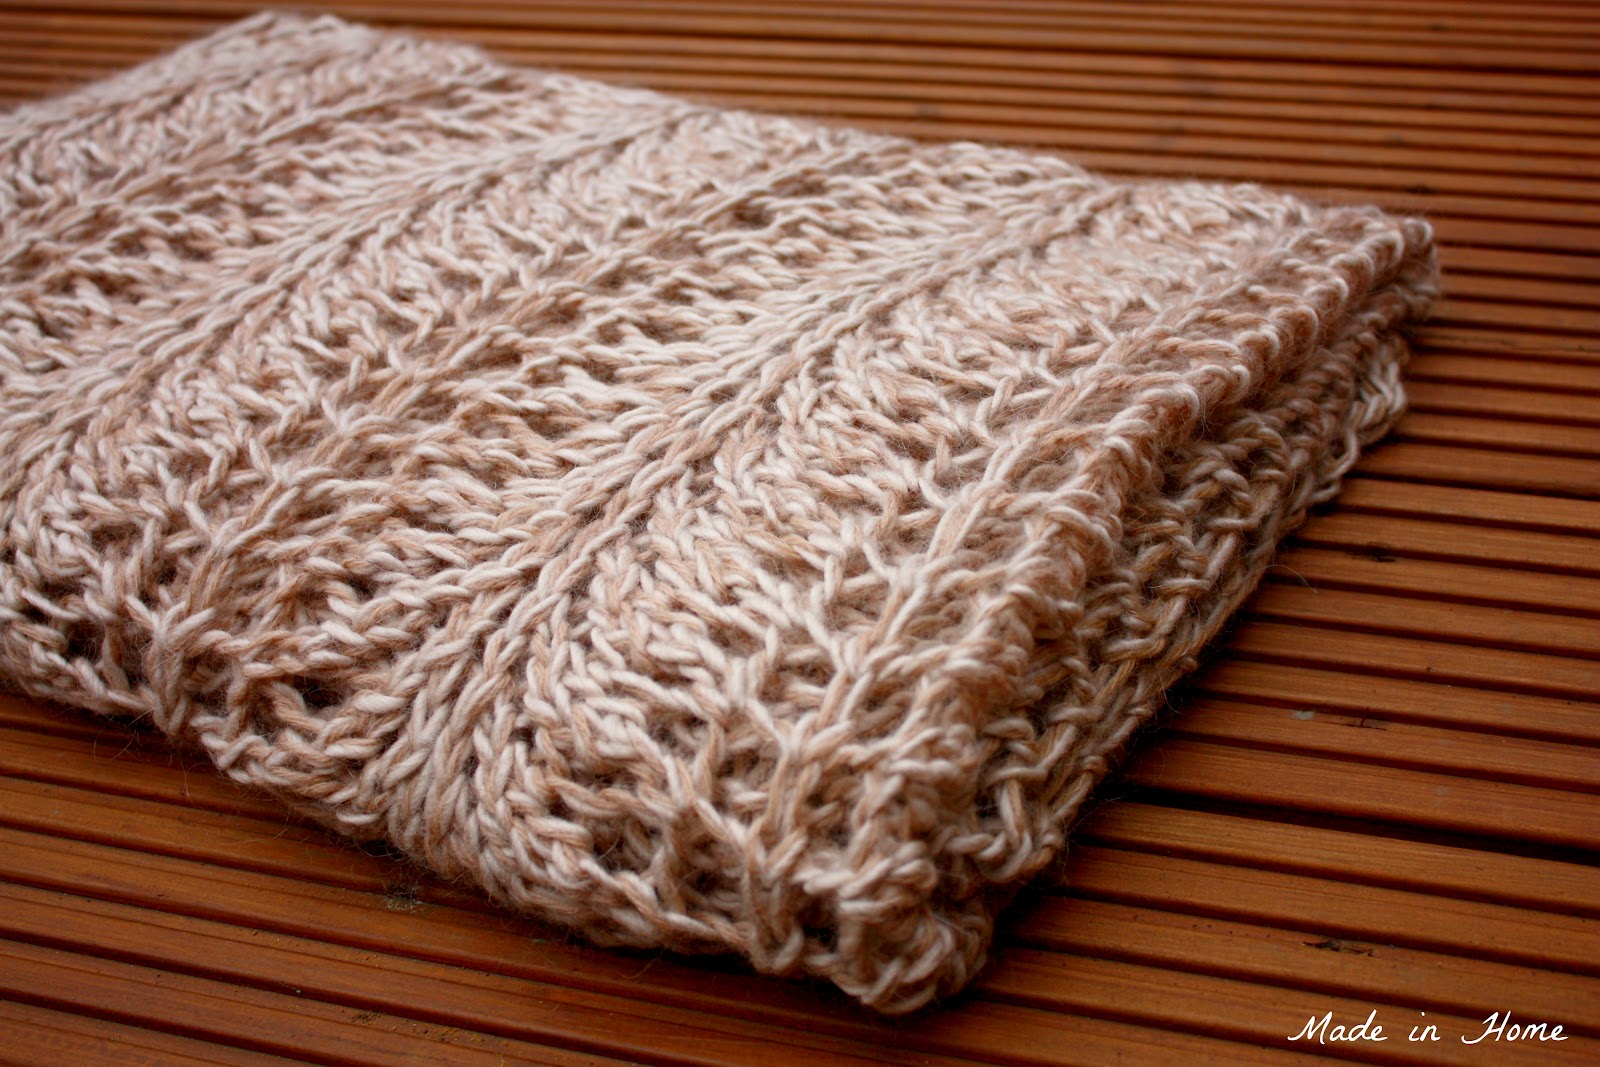 Made in Home: Creamy Buttery Blanket {knitting pattern}